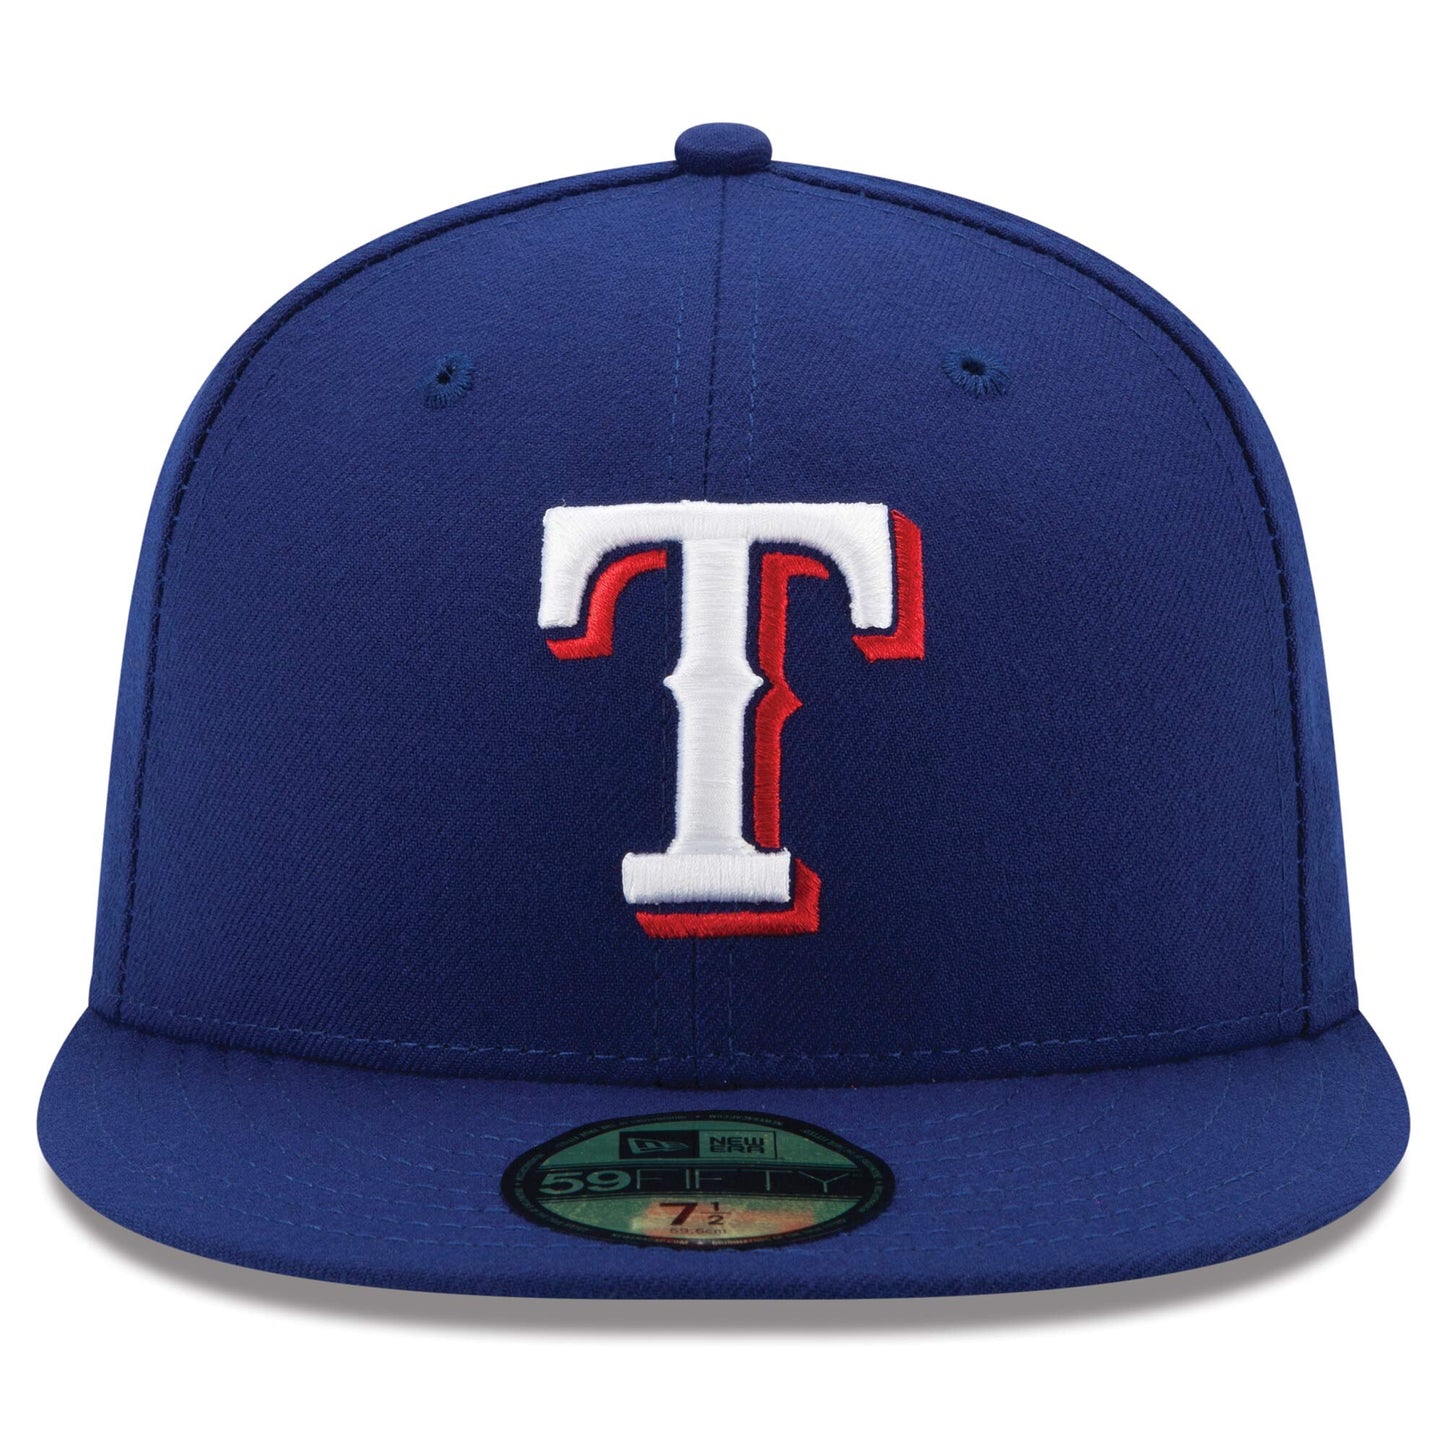 Men's Texas Rangers New Era Royal Blue Authentic Collection On-Field 59FIFTY Fitted Hat